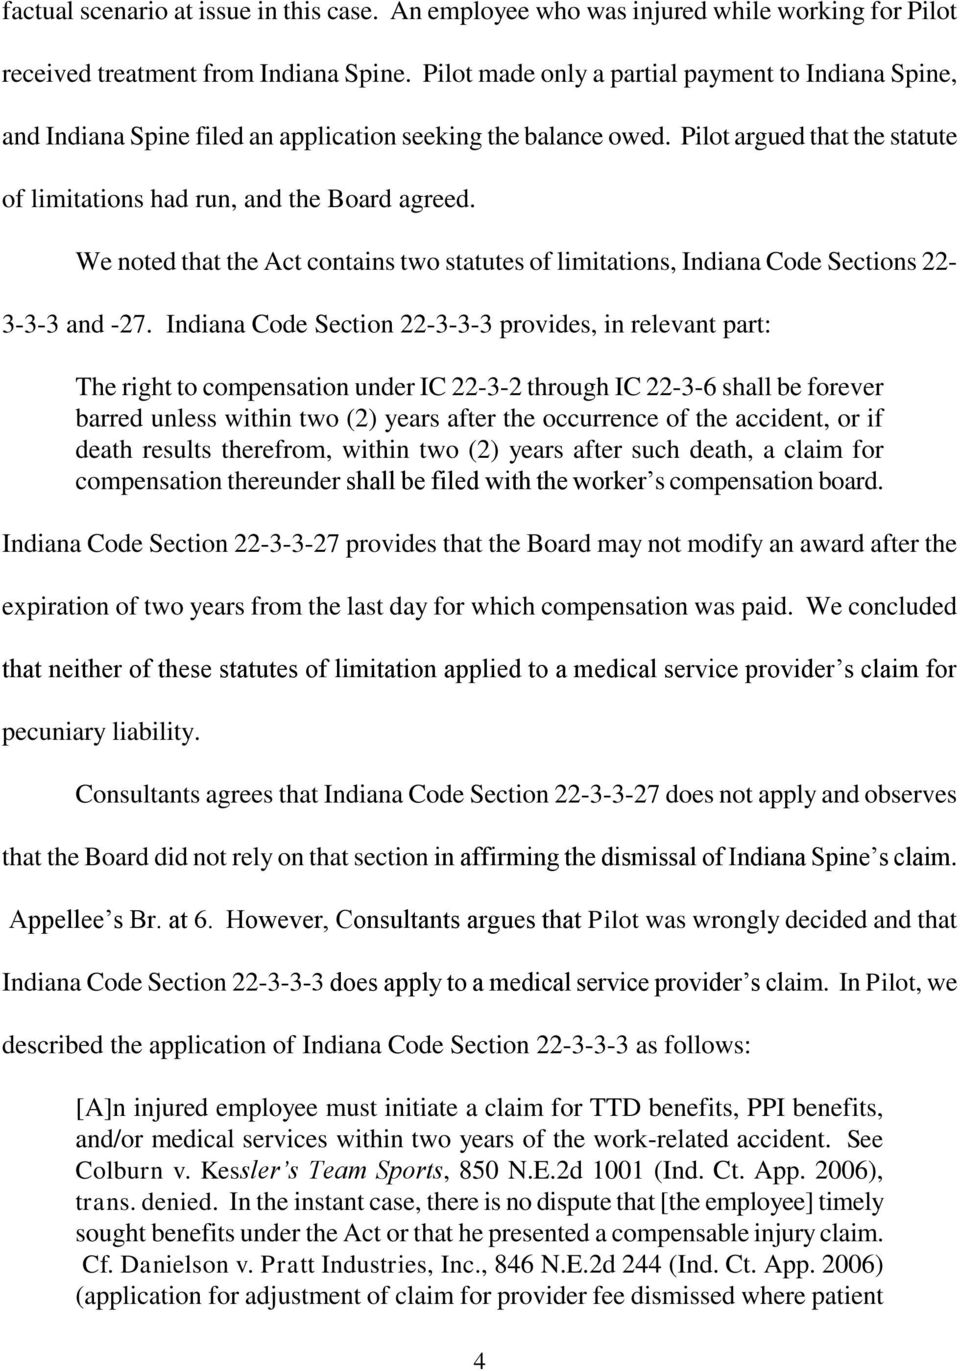 We noted that the Act contains two statutes of limitations, Indiana Code Sections 22-3-3-3 and -27.